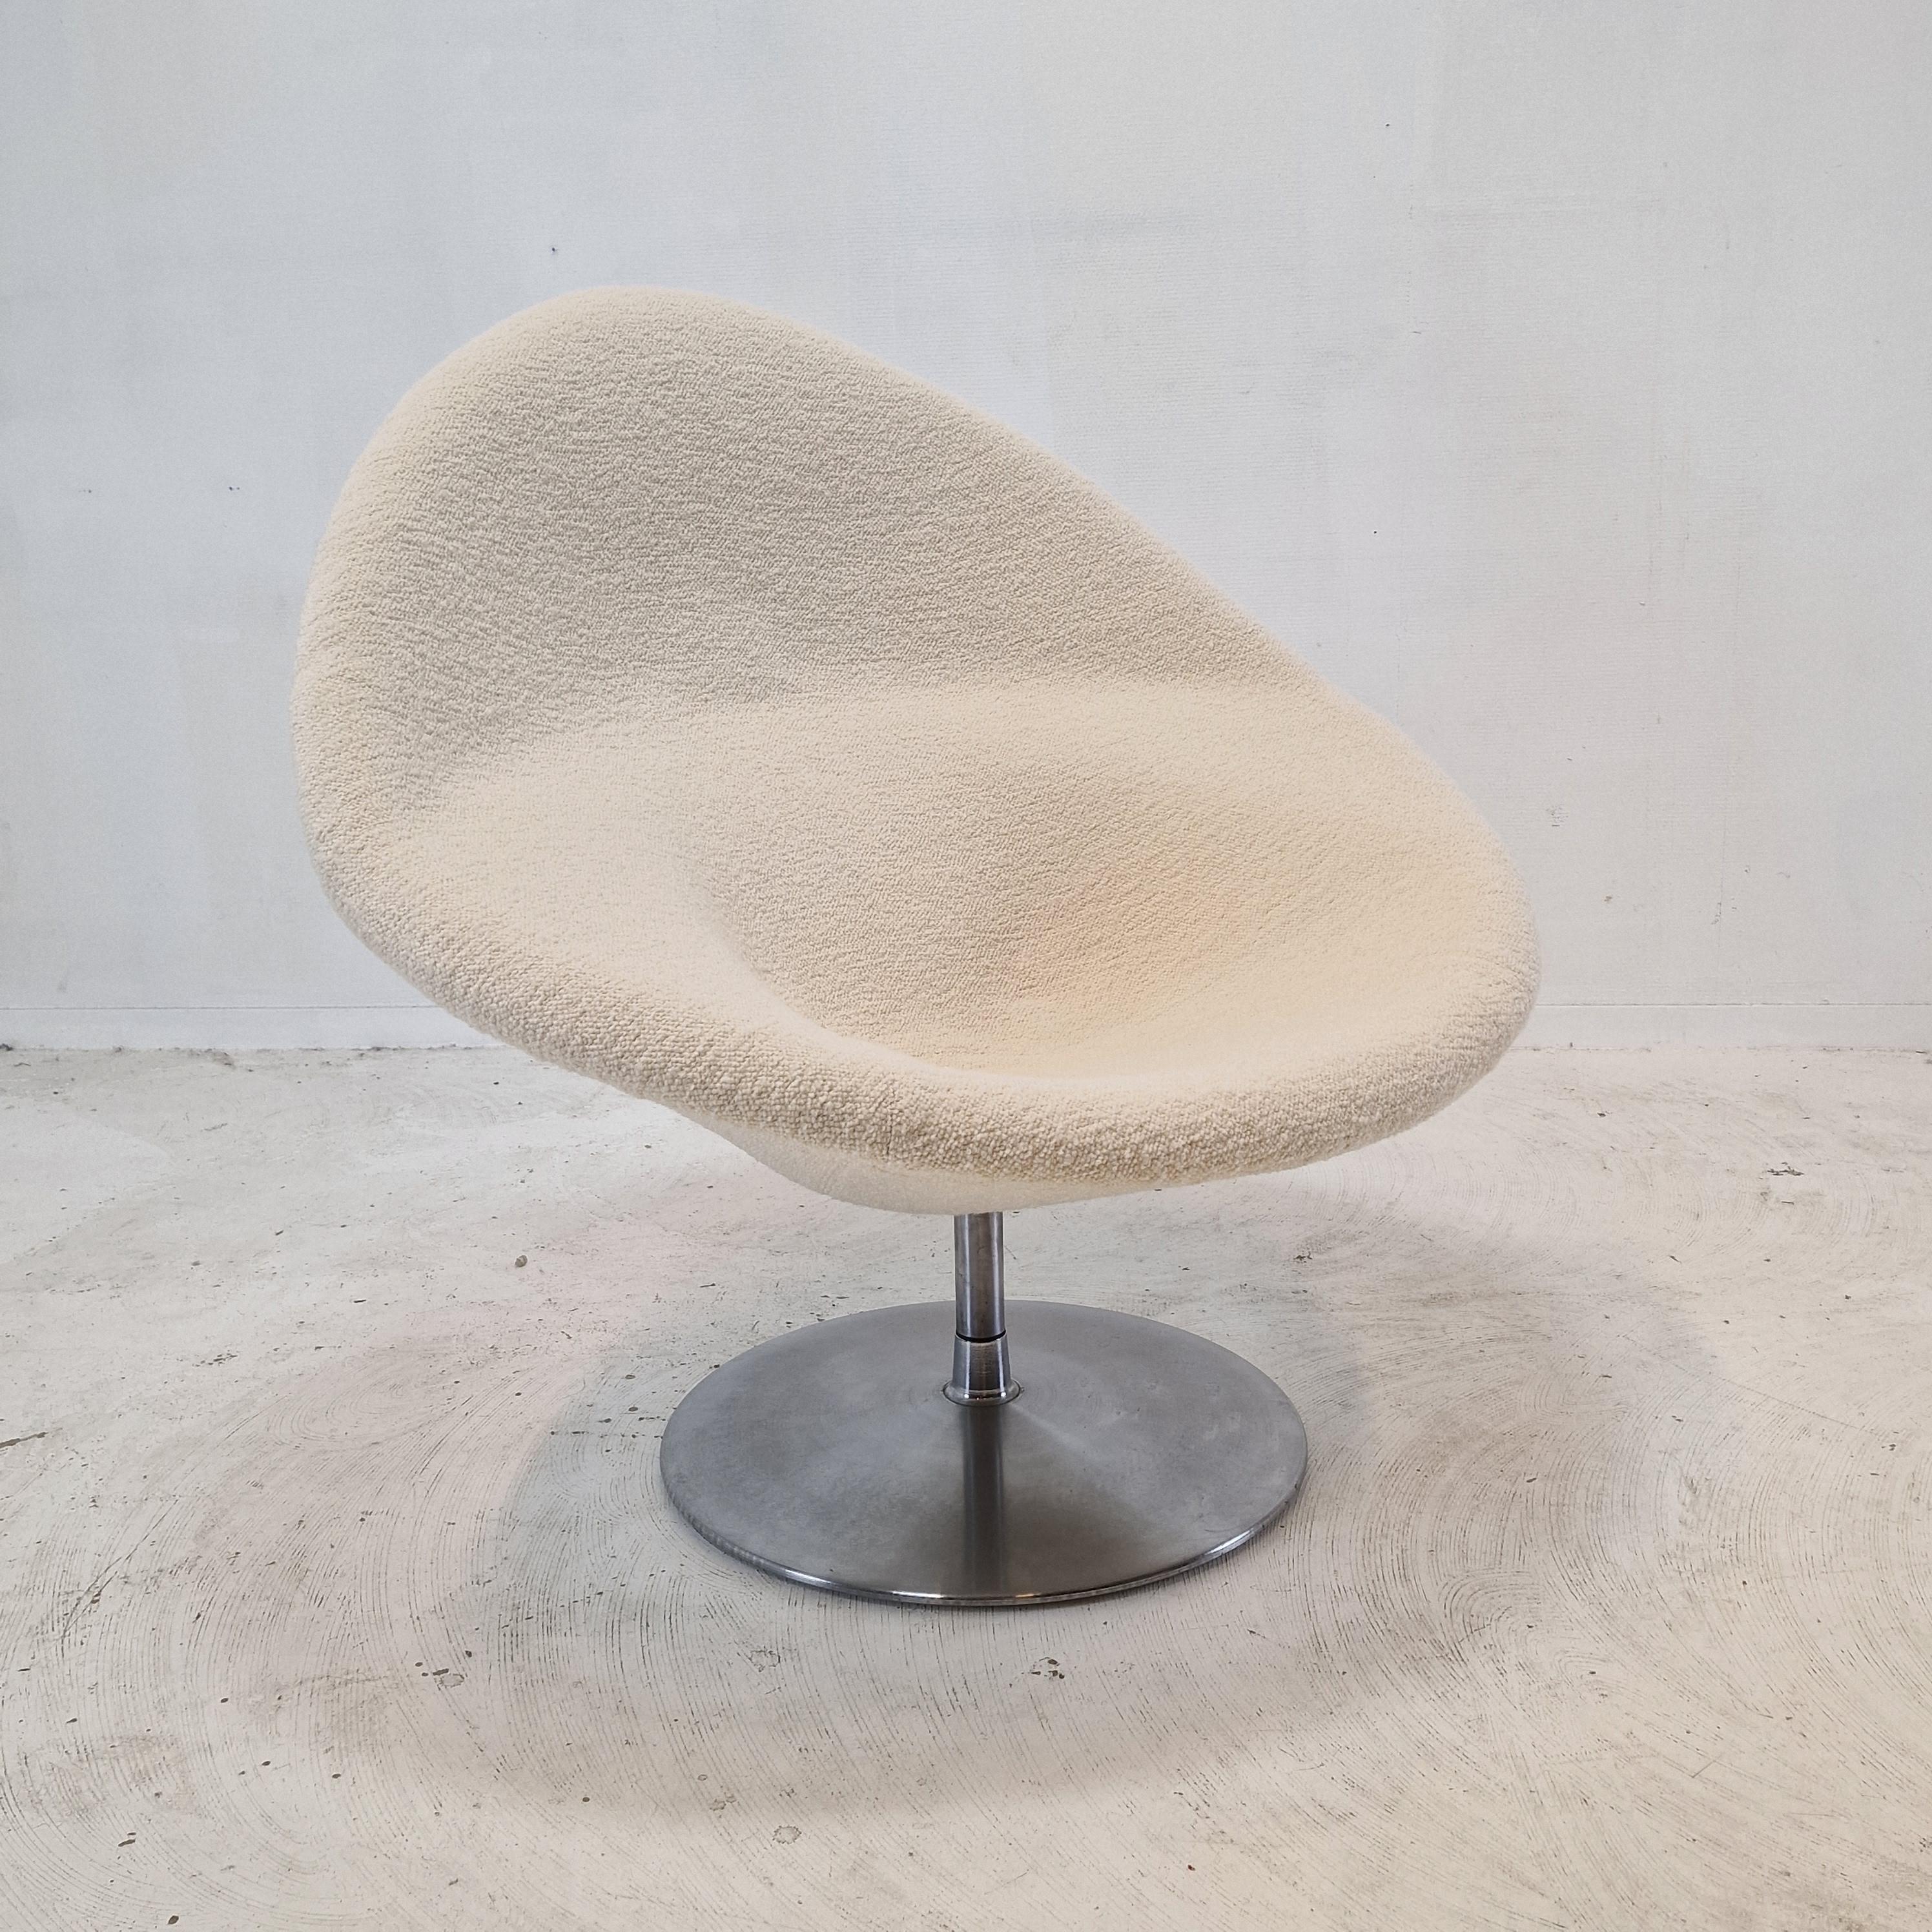 Woven Mid Century Big Globe Armchair with Ottoman by Pierre Paulin for Artifort, 1960s For Sale